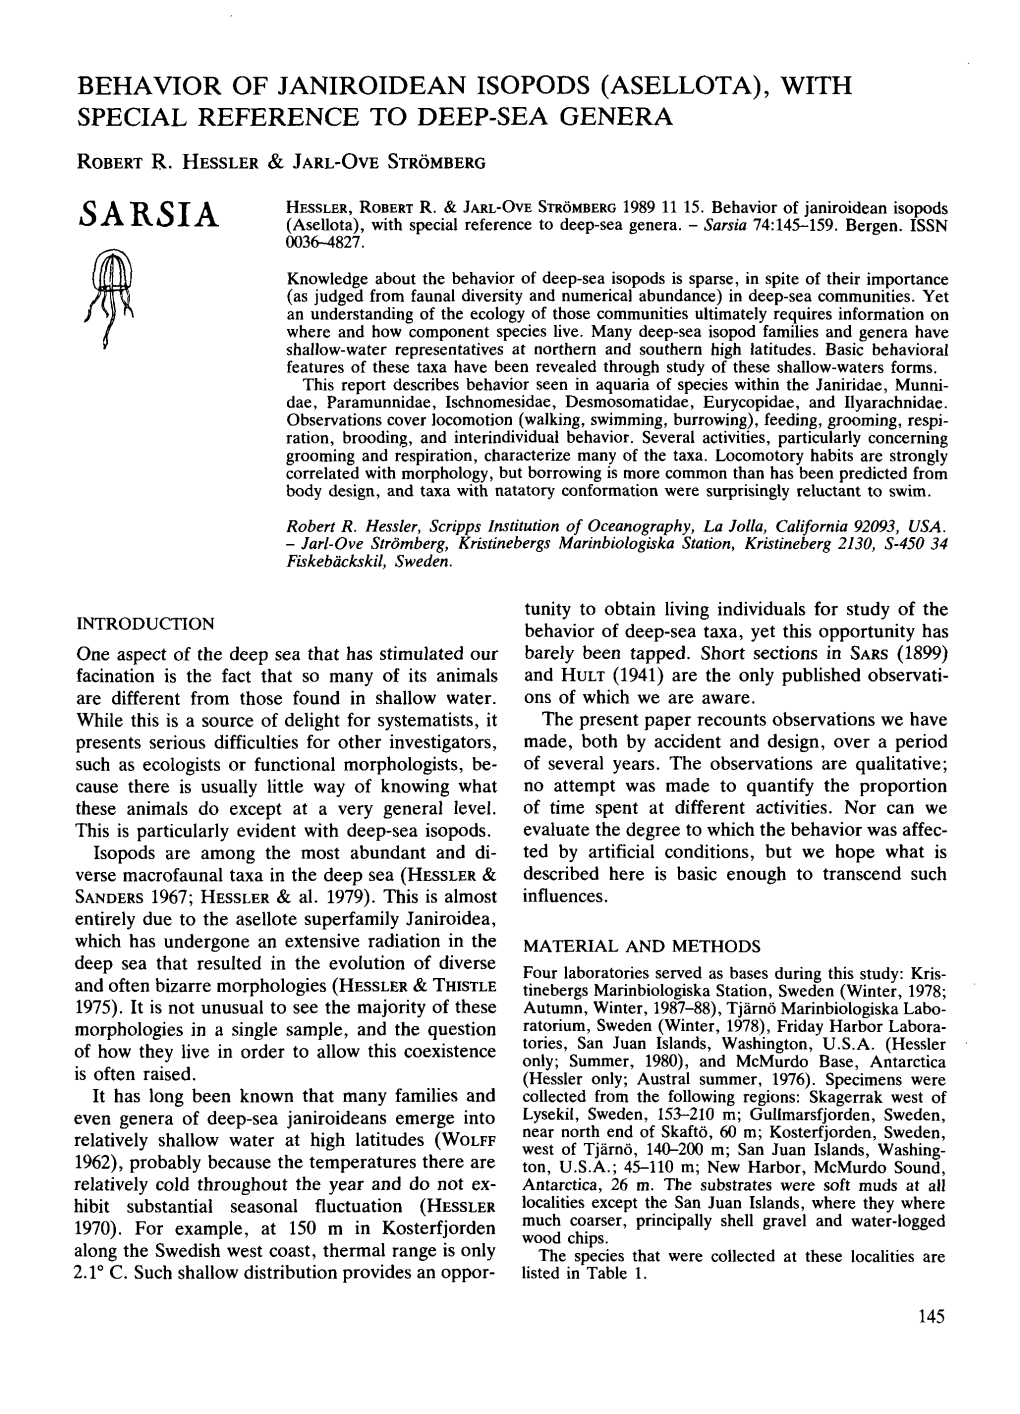 SARSIA (Asellota), with Special Reference to Deep-Sea Genera